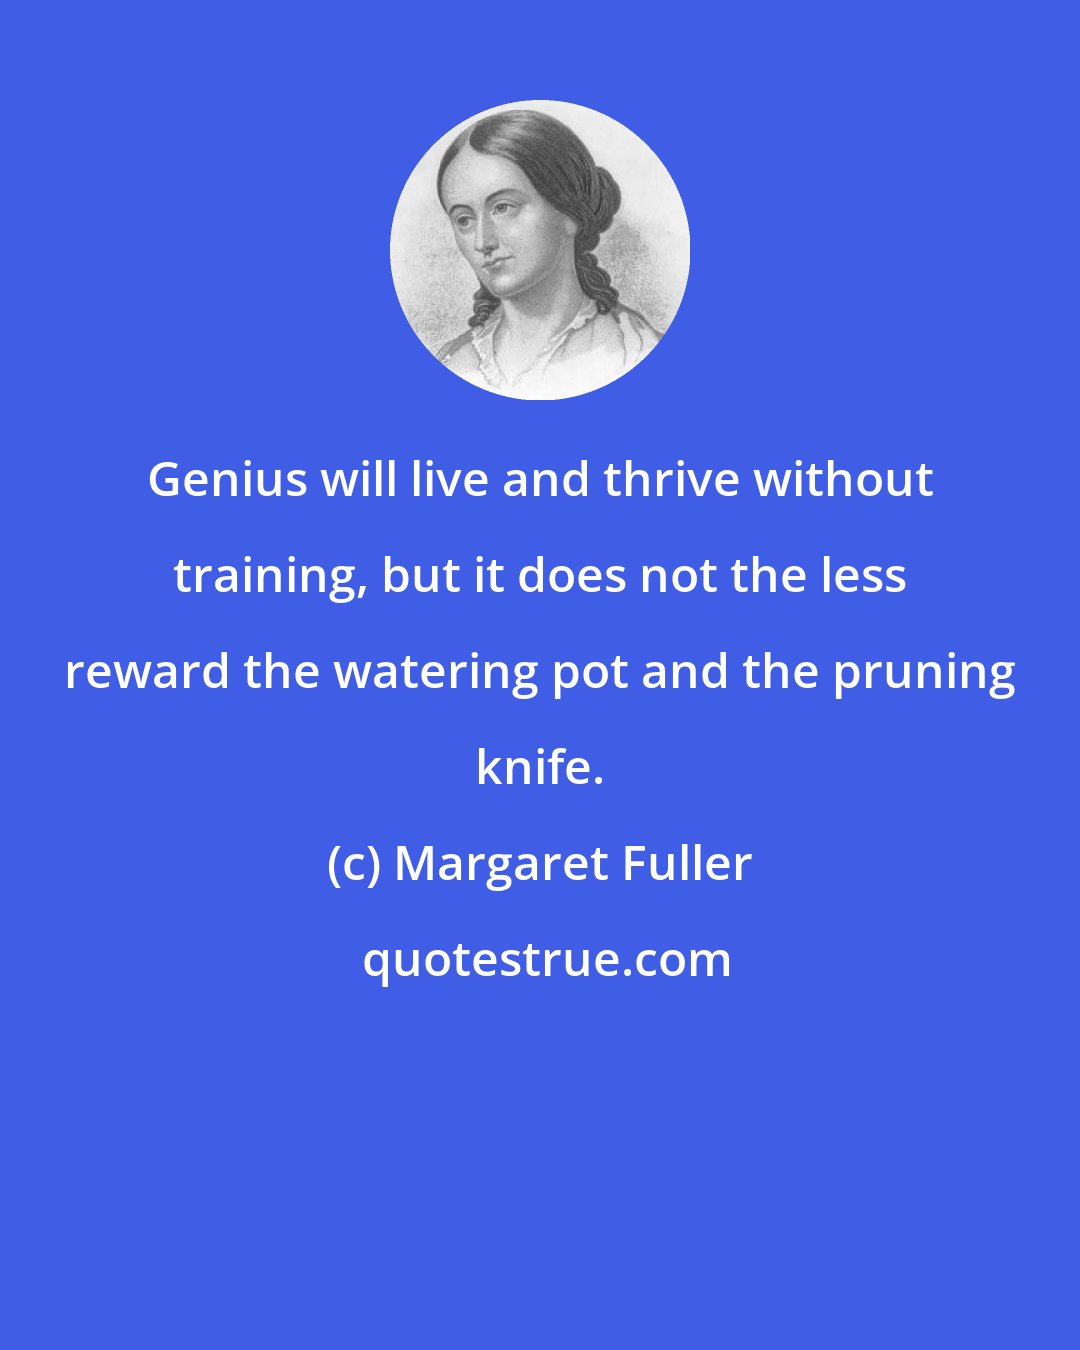 Margaret Fuller: Genius will live and thrive without training, but it does not the less reward the watering pot and the pruning knife.